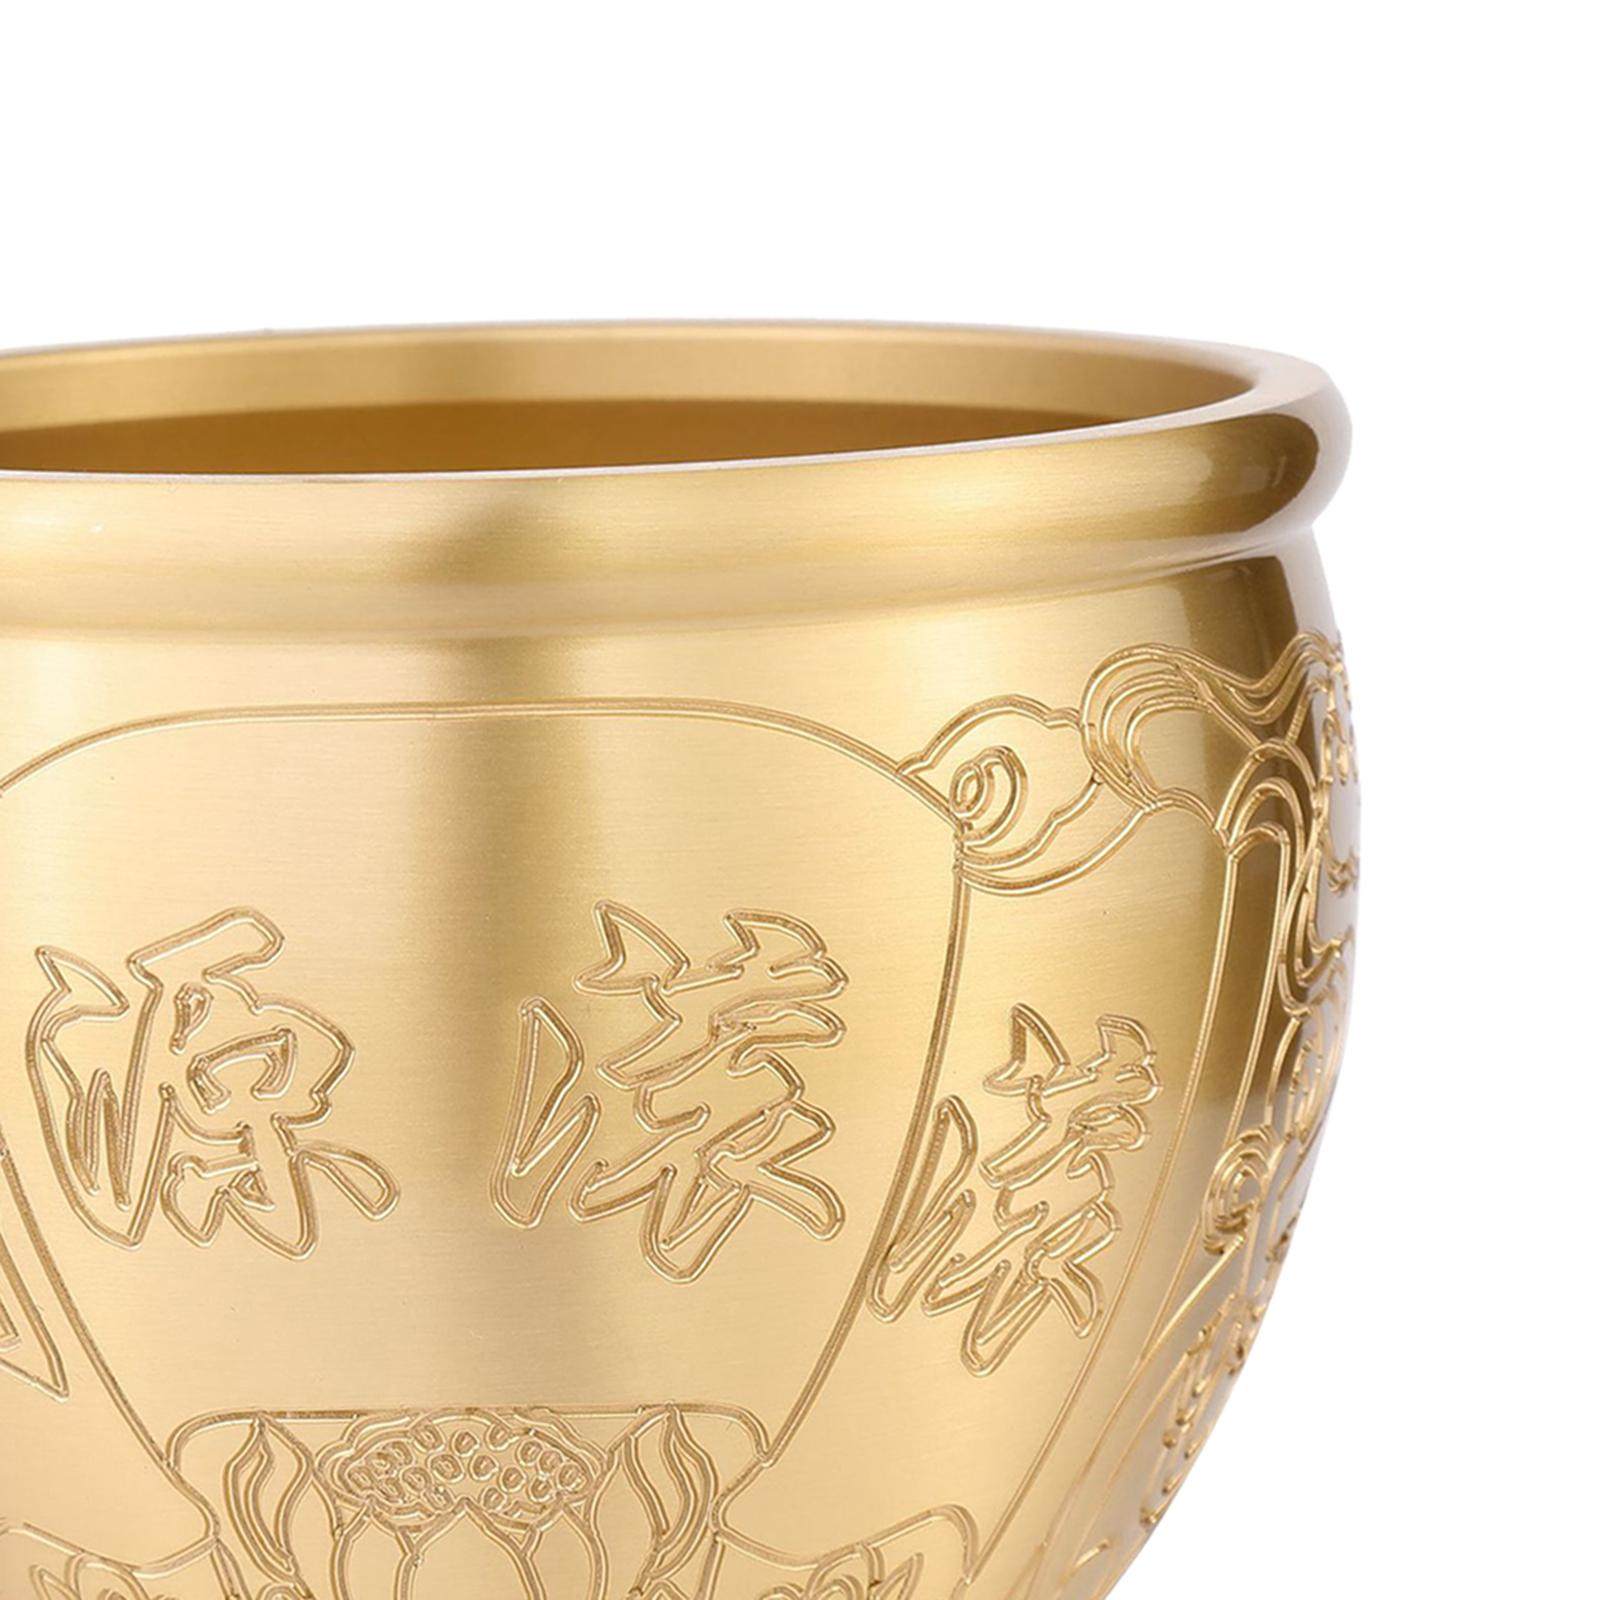 Brass Feng Shui Bowl Treasure Bowl Luck Collectible Table Decoration 9.5cmx7.3cm